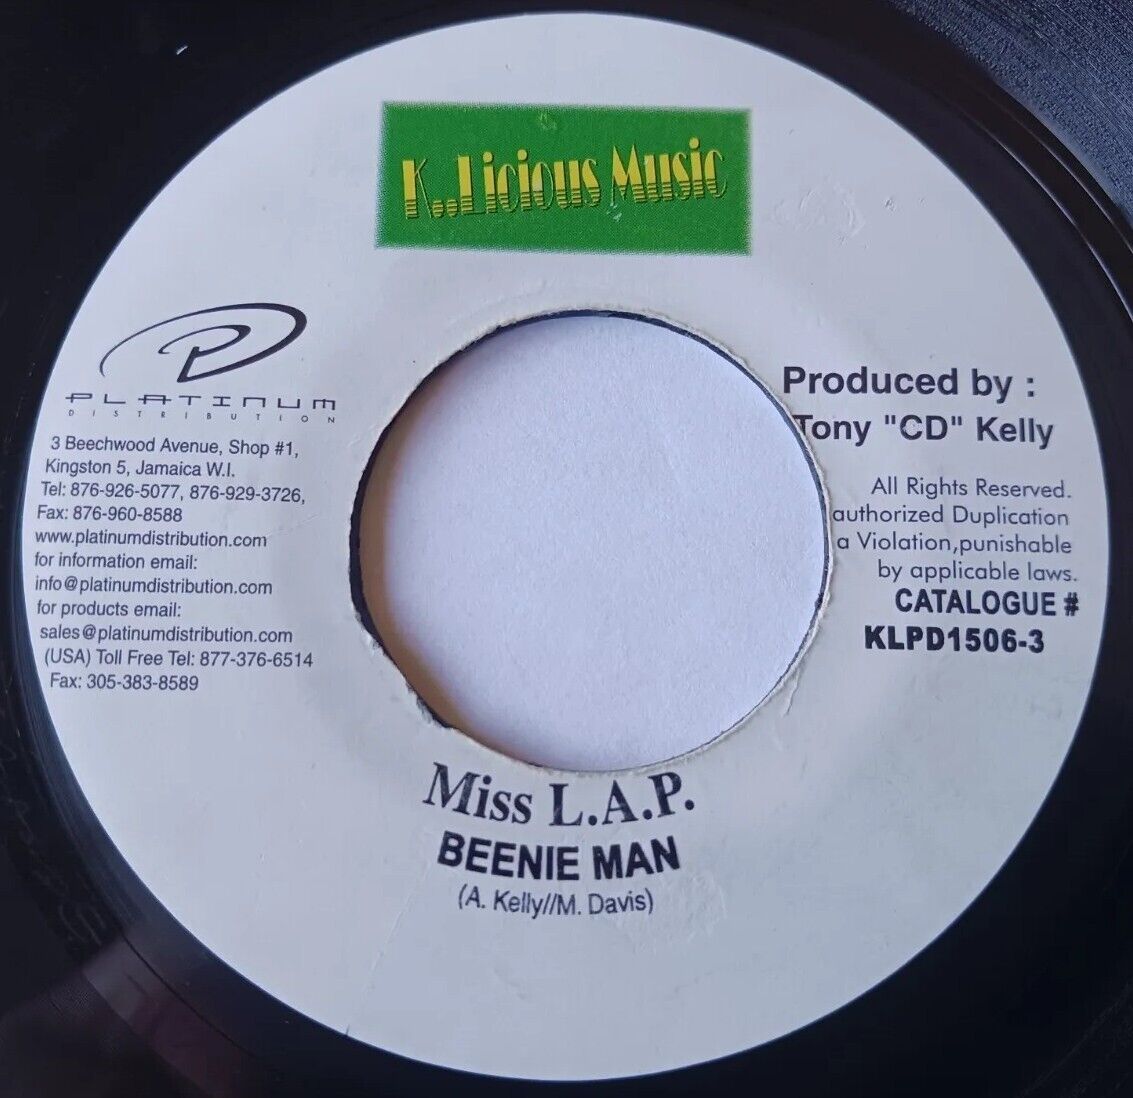 Beenie Man - Miss L.A.P. / Buy Out Version Vinyl 45 - 2001 K..Licious Music 